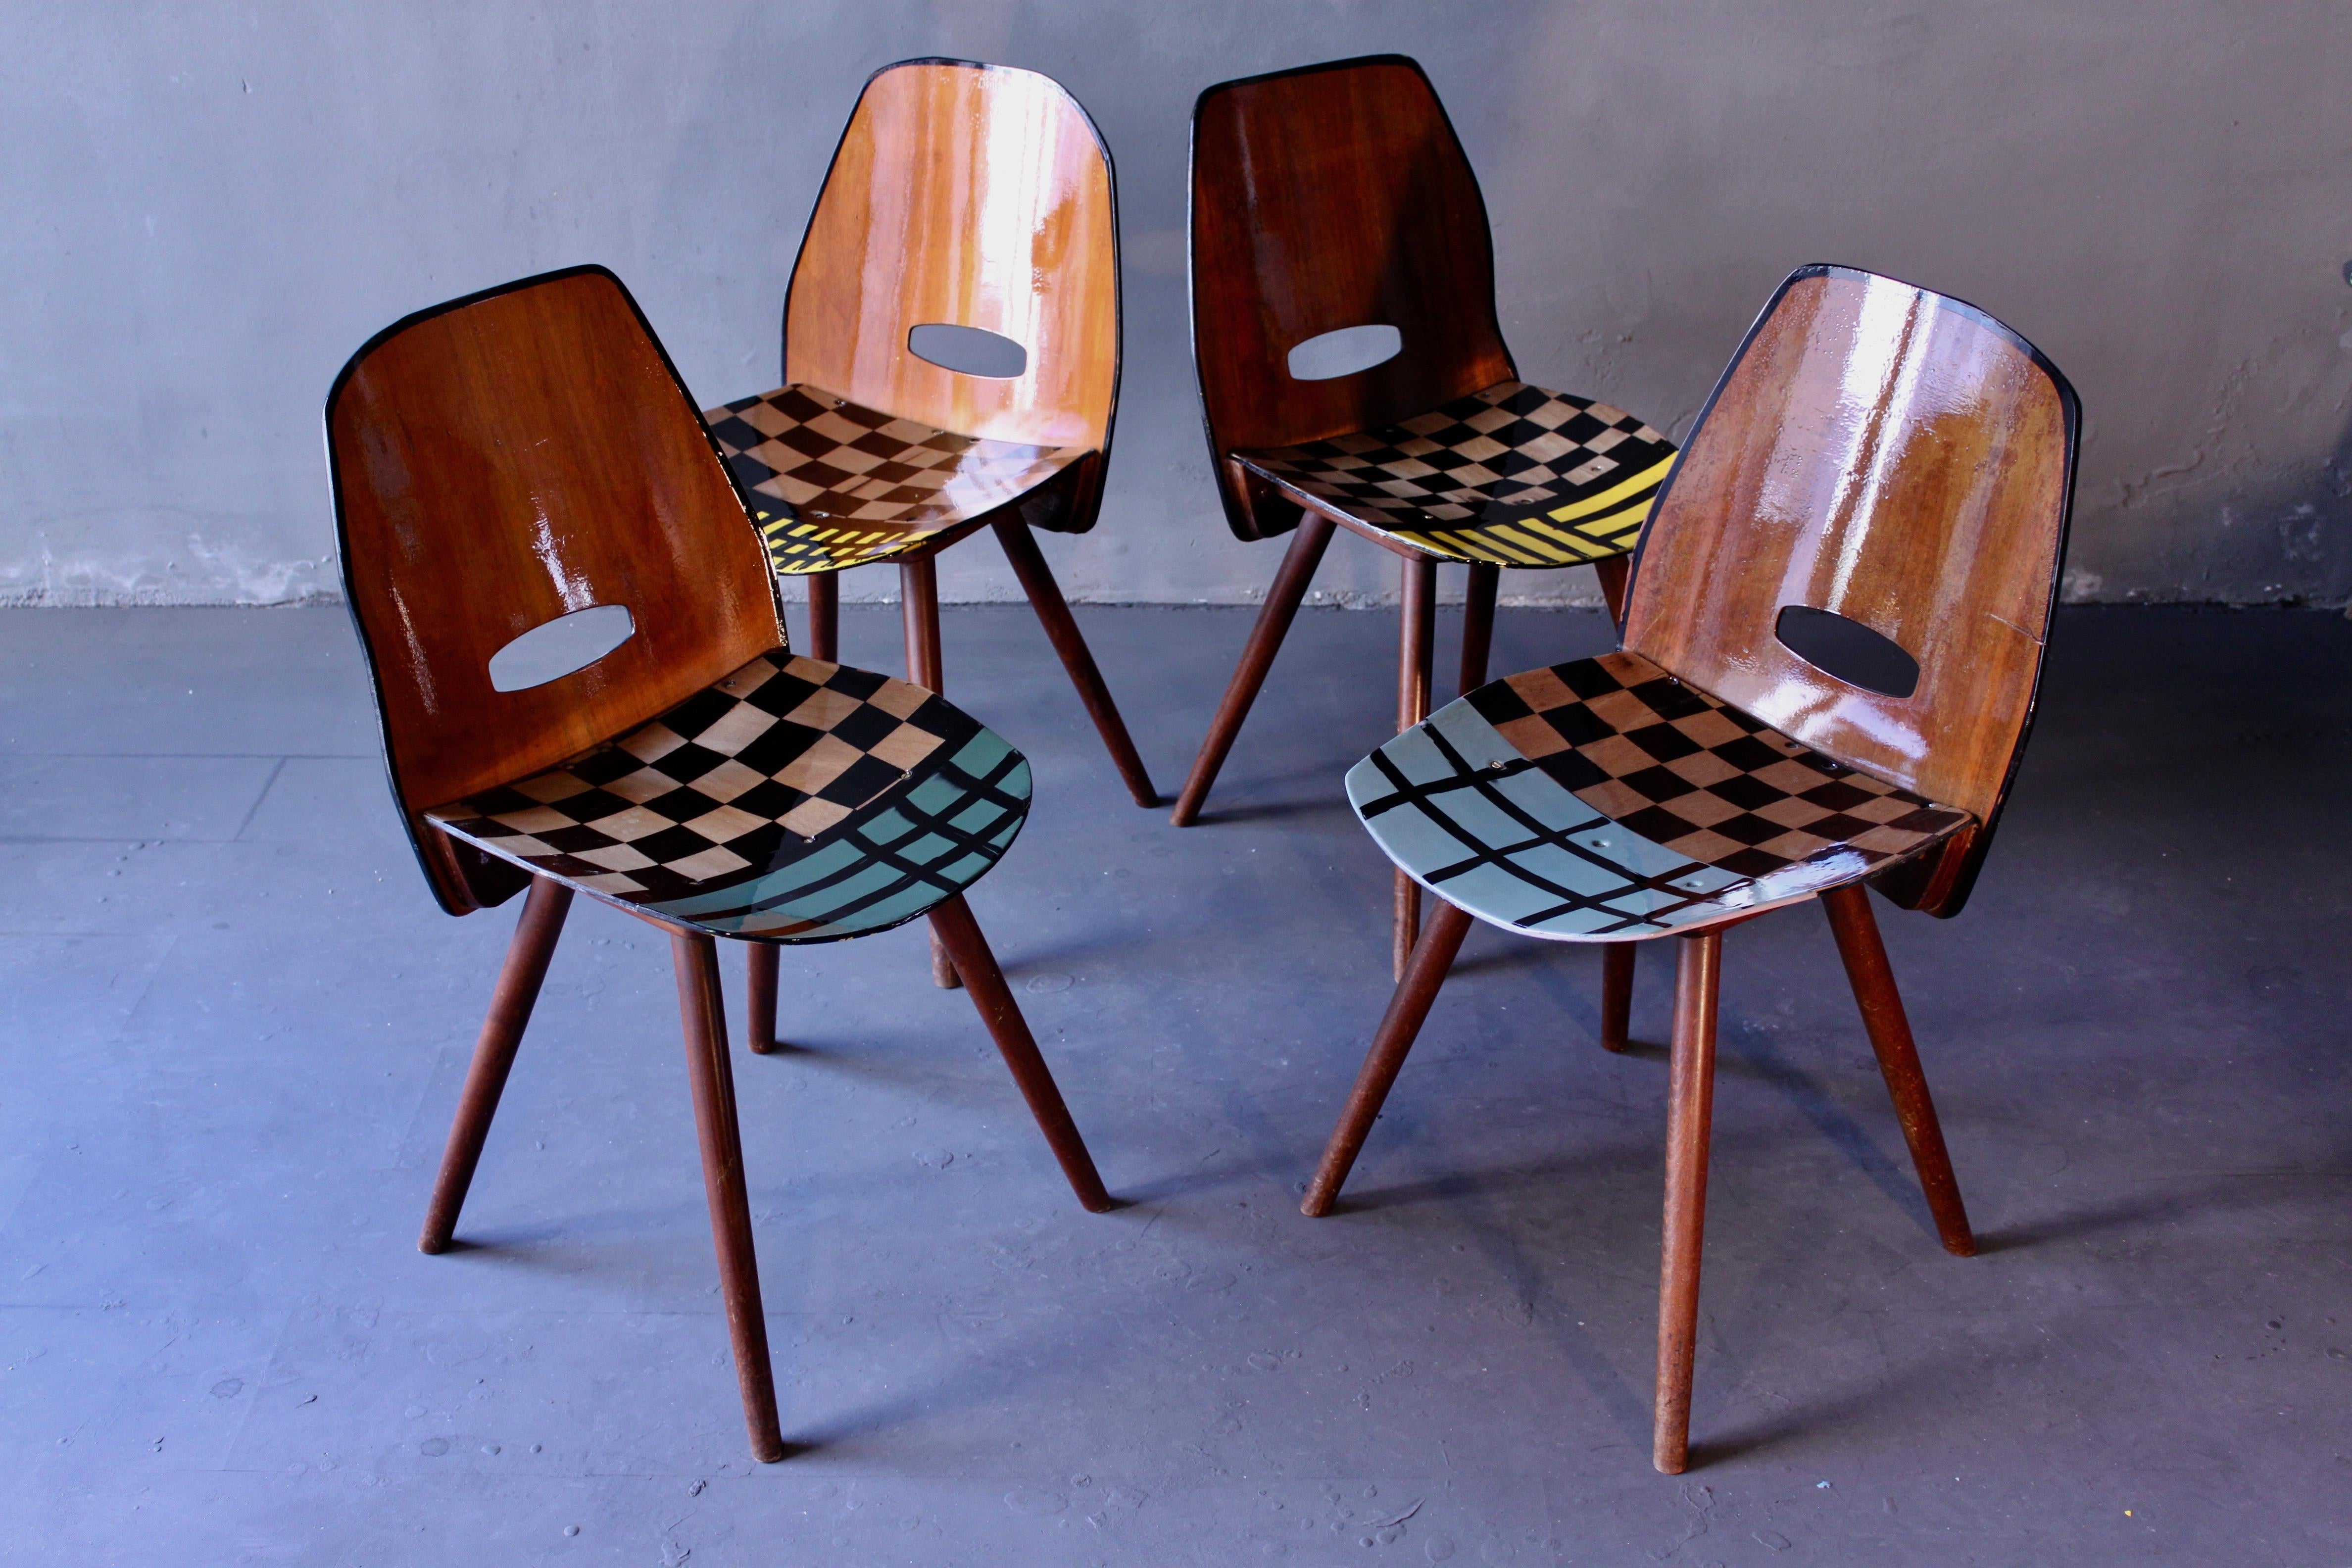 Czech design set of 4 chairs, re-worked and contemporized by Atelier Staab. Painted, multi-lacquered. Functional Art, Art Design, Contemporary Furniture. In the manner of Marten Baas, Bauhaus, DeCotis, Joaquim Tenreiro, Lúcio Costa, Fernando